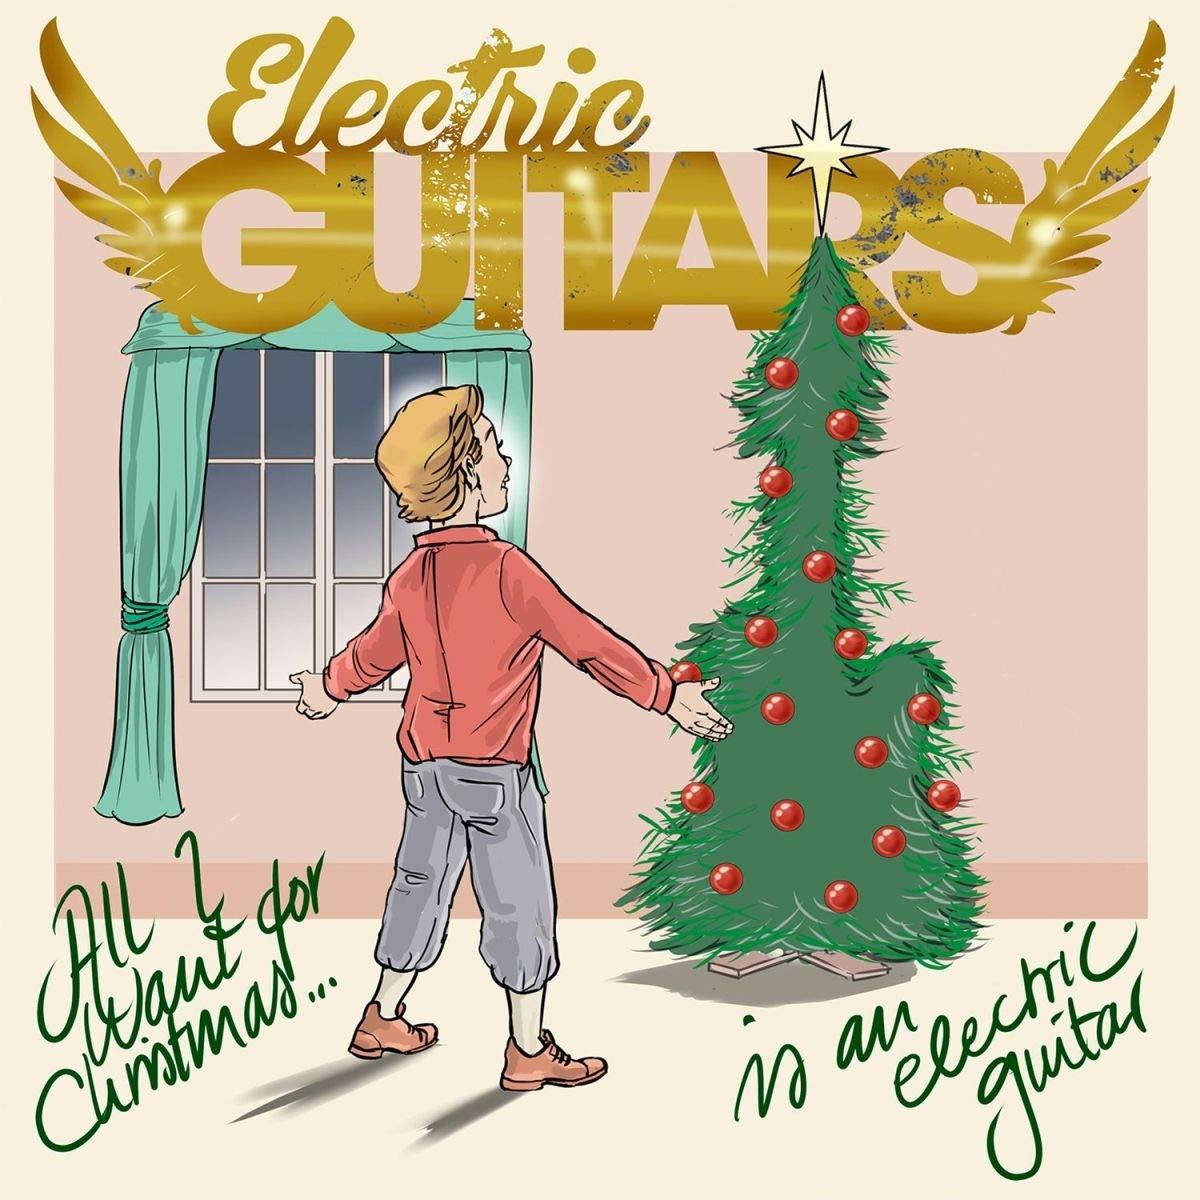 Electric Guitars (EP -COLOURED- I - 7-ALL - WANT.. (analog))